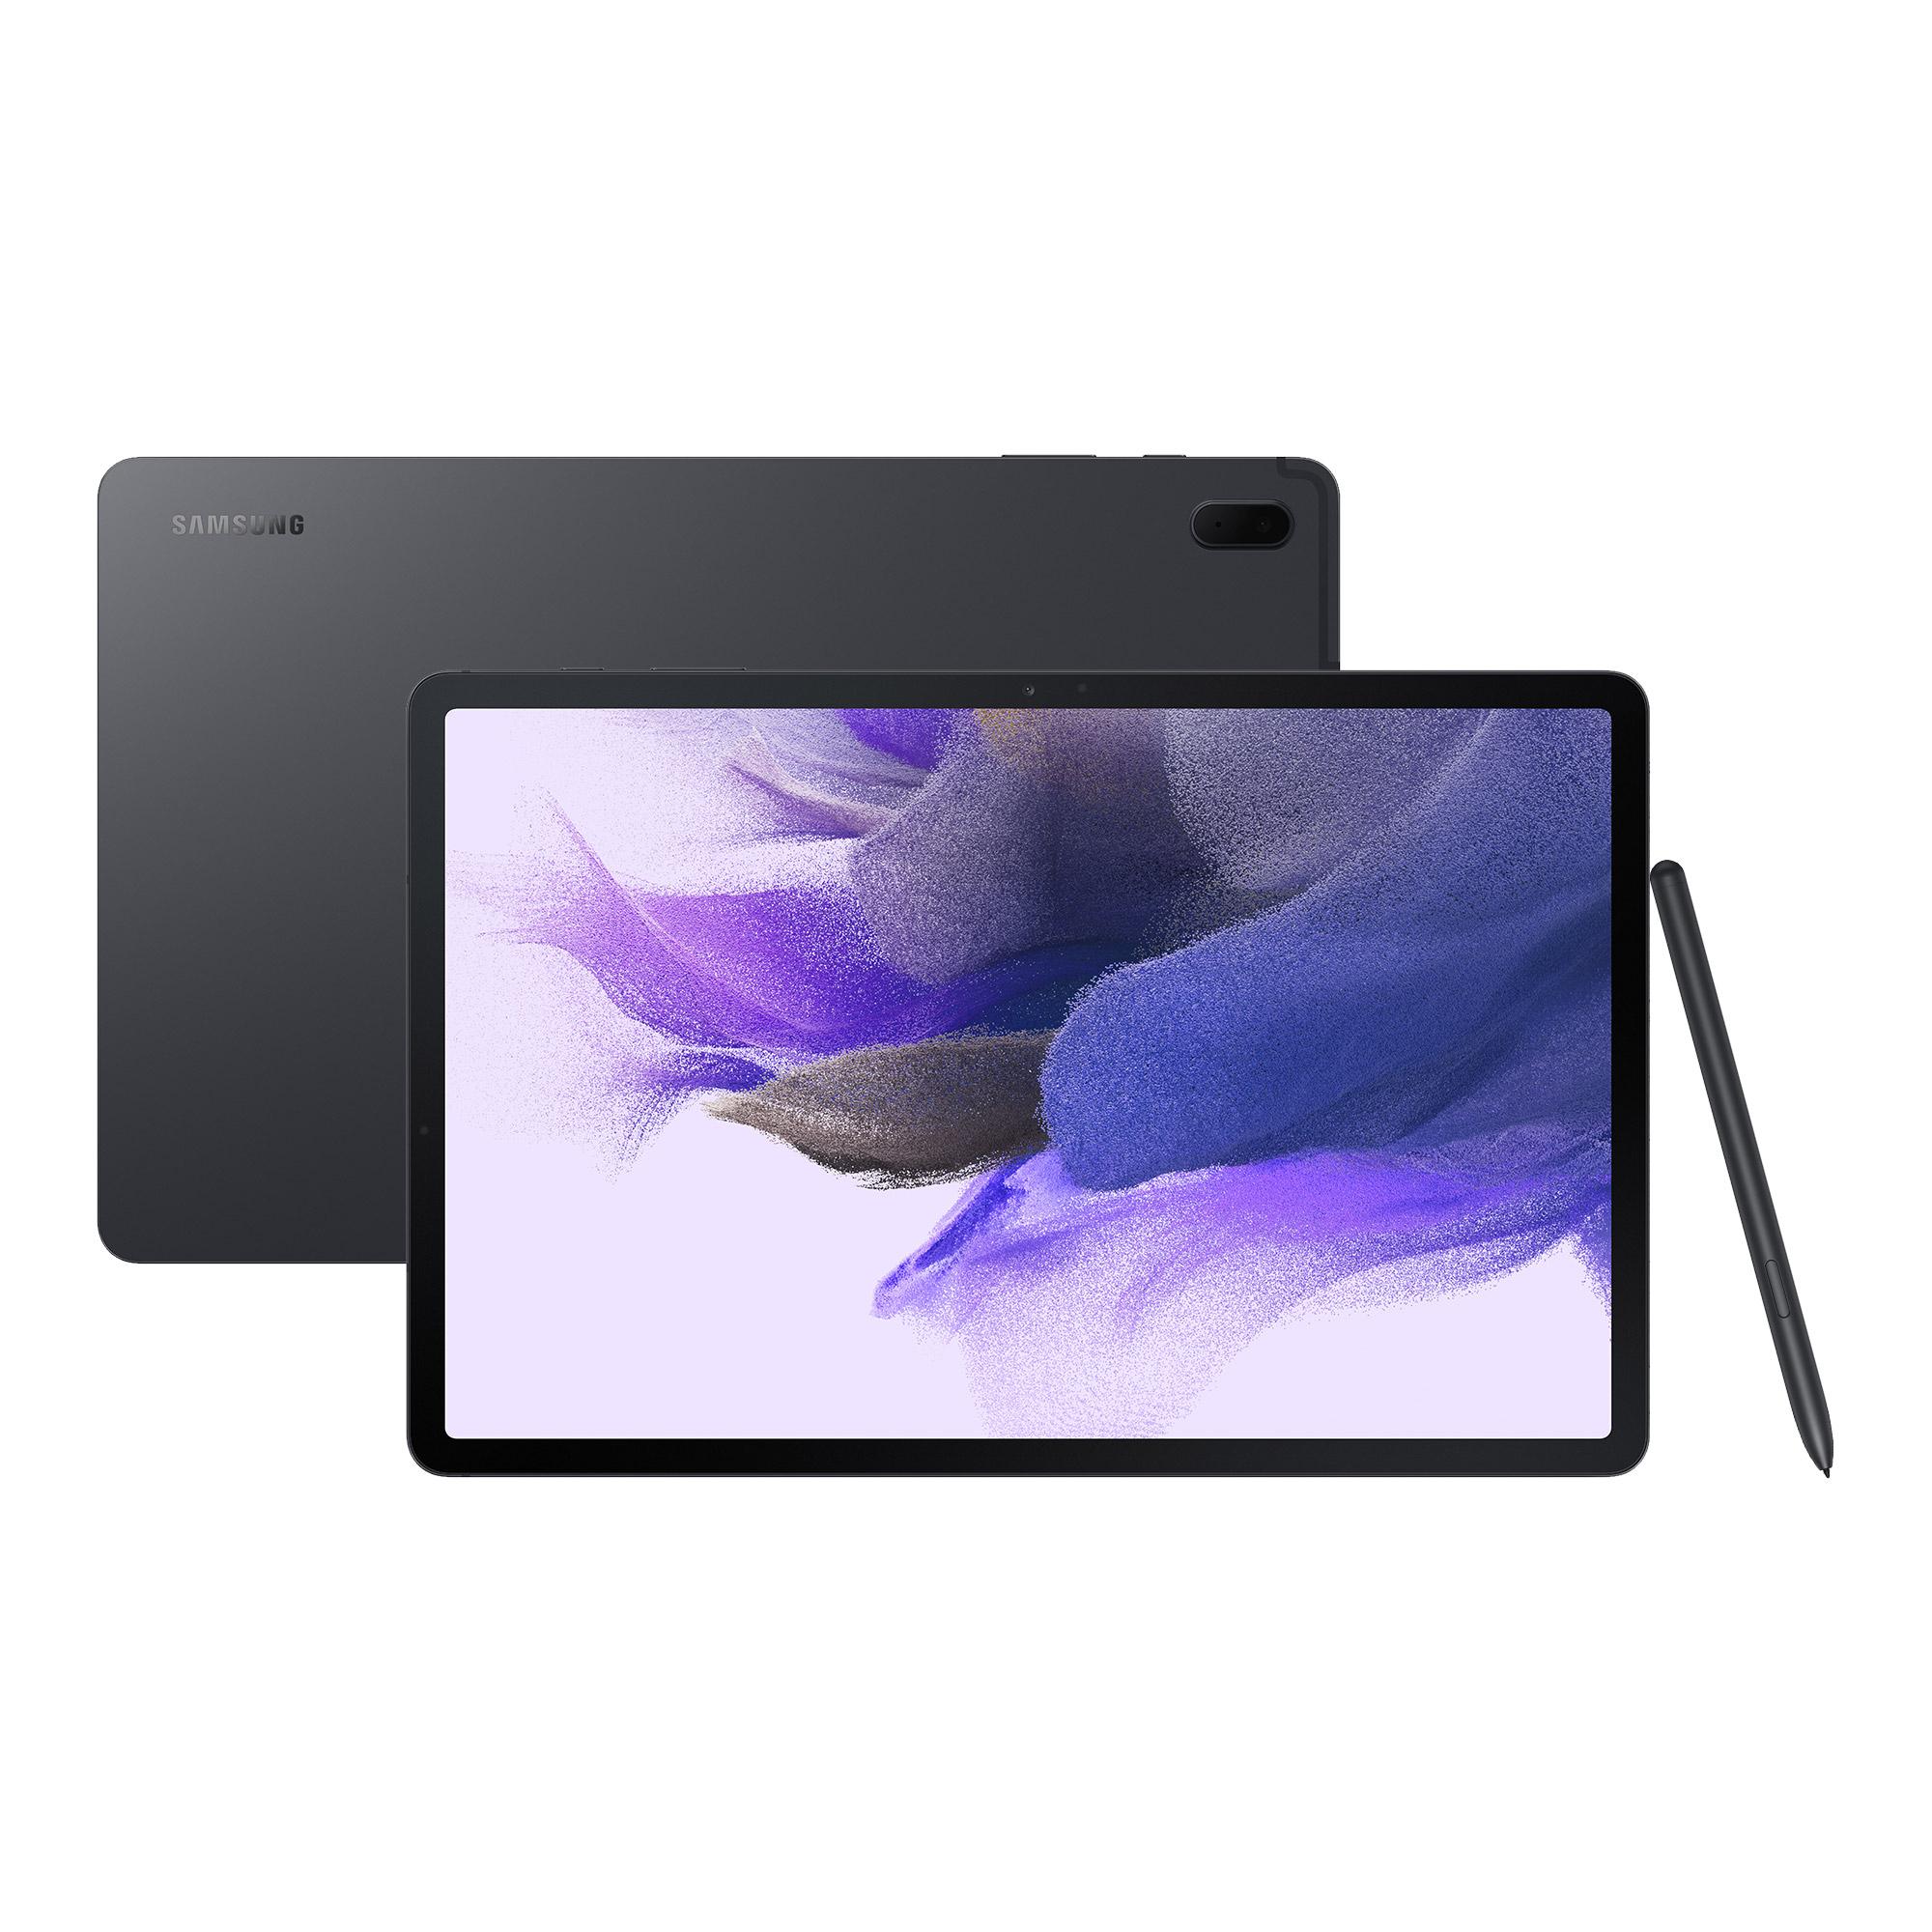 £519, SAMSUNG Galaxy Tab S7 FE 12.4inch Tablet - 64 GB, Mystic Black, Android 11, Quad HD screen, 64 GB storage: Perfect for apps / photos / videos / games, Add more storage with a microSD card, Dolby Atmos, Miracast, 